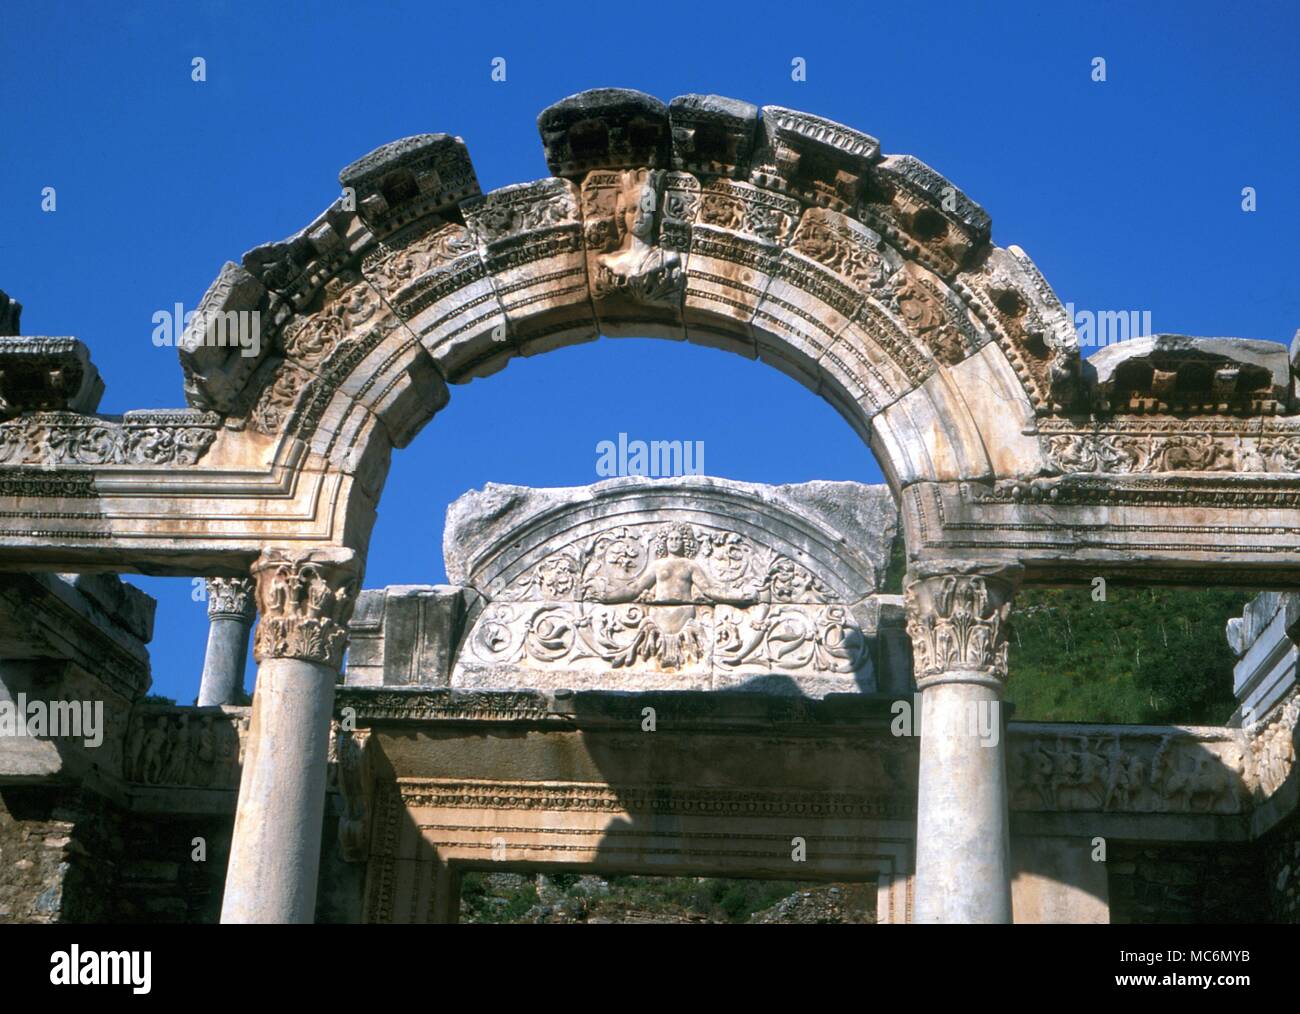 Remains of the so-called Temple of Hadrian on the sacred way at Ephesus, Turkey. Stock Photo